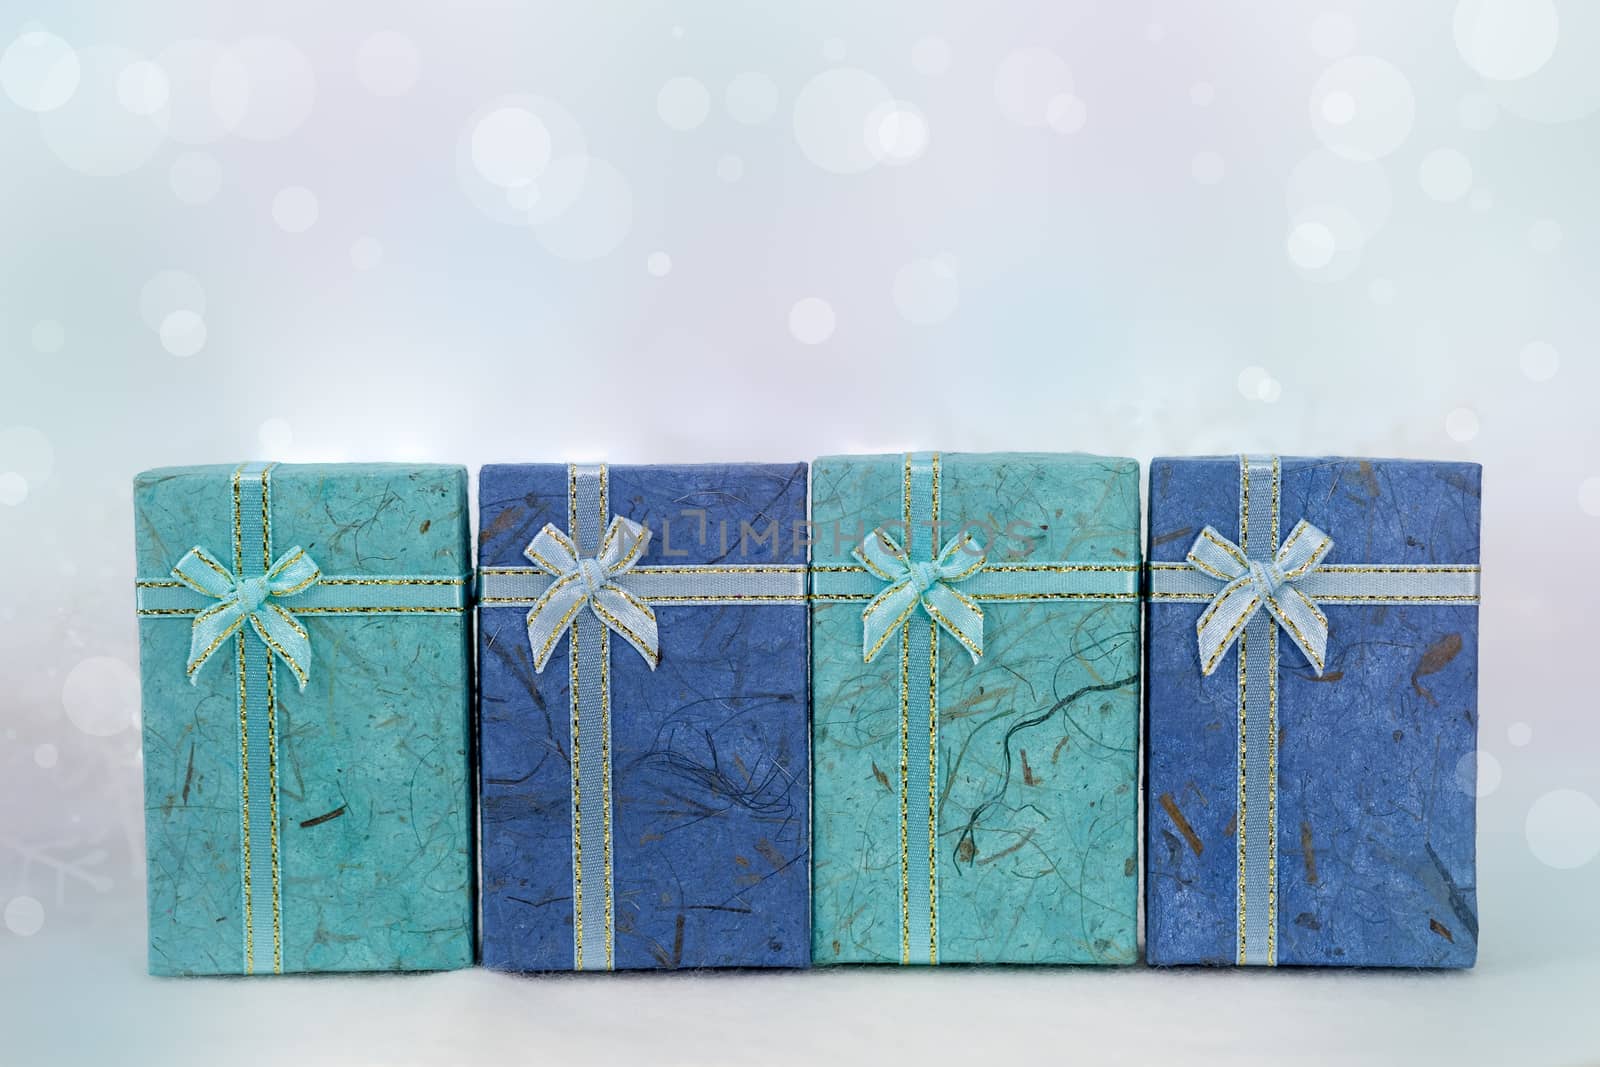 Blue gift boxes on the white fur in bokeh background, with copy space for season greeting. Merry Christmas or Happy New Year, AF point selection,blurred.